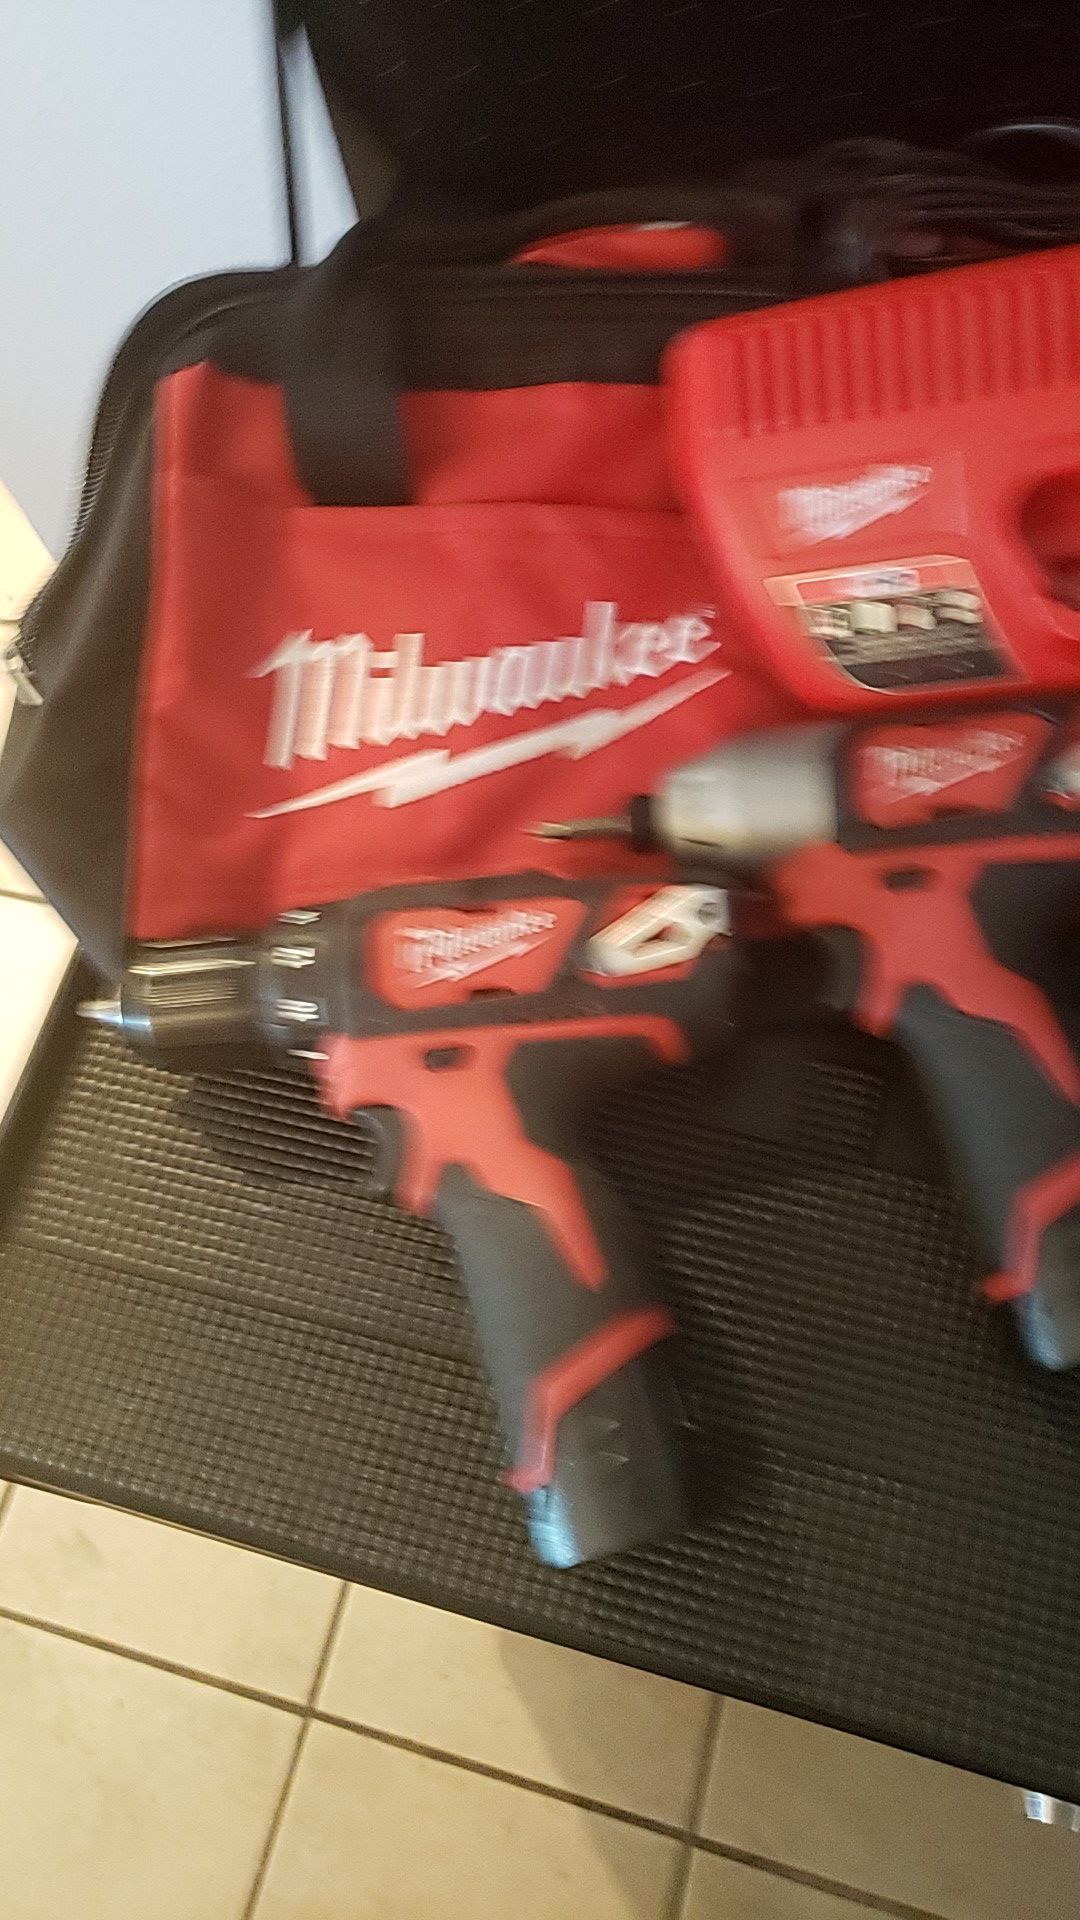 Milwaukee M-12 Matching 2 Tool Set!!! Looks & Works PERFECT!!! Includes 3/8" Drill , 1/4" Impact, 2 Batt W/Charger & Work Bag!! Must Sell!!! Offers??